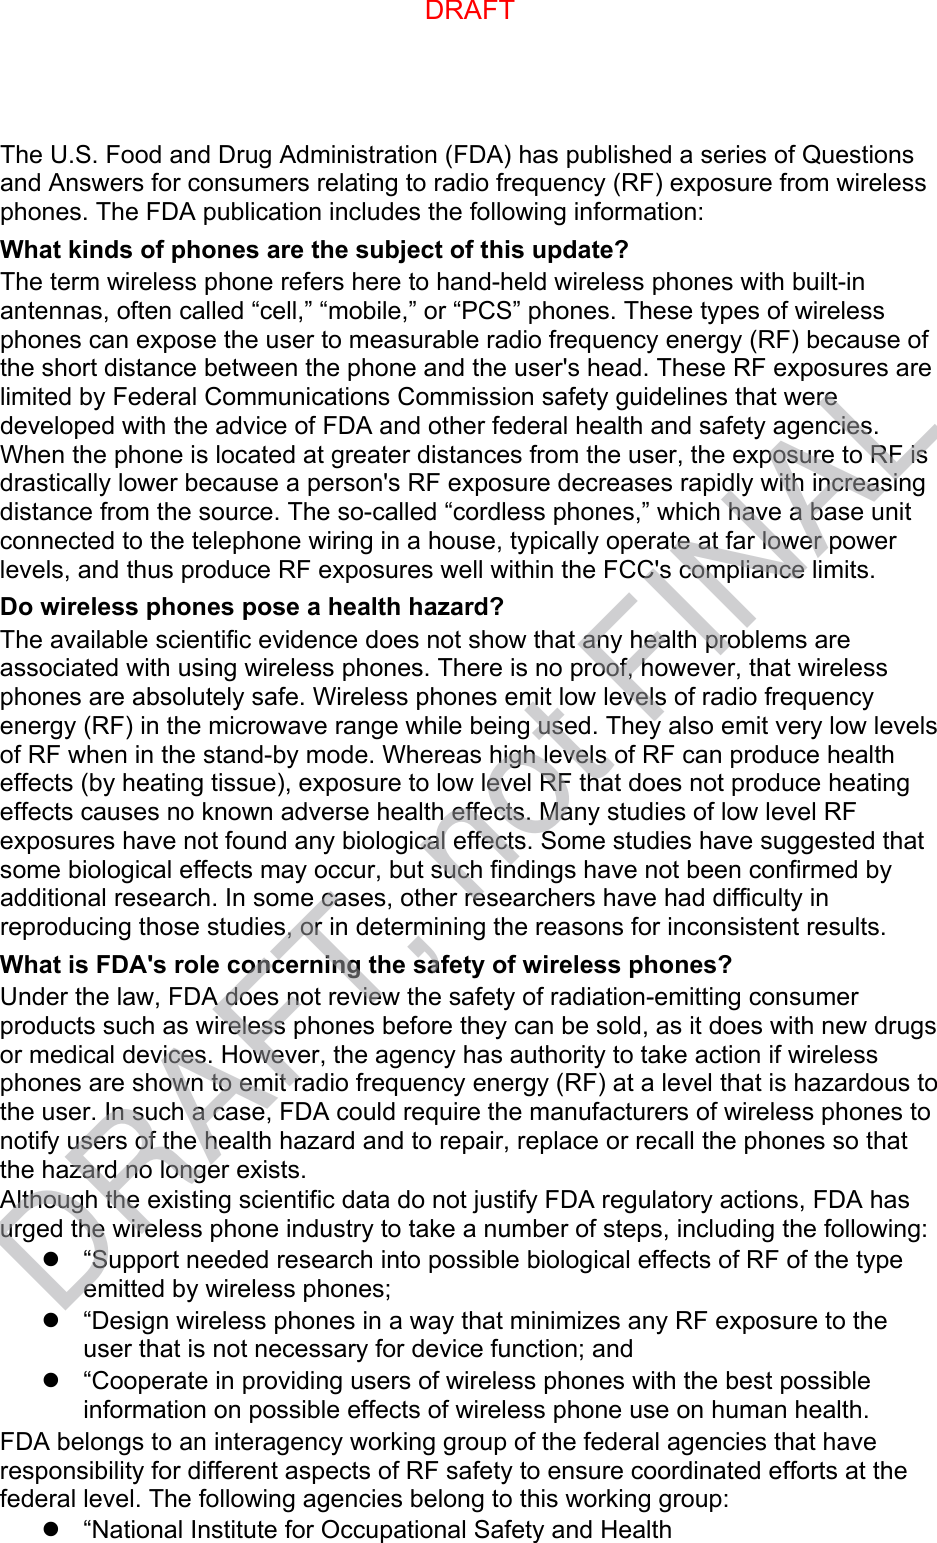 The U.S. Food and Drug Administration (FDA) has published a series of Questions and Answers for consumers relating to radio frequency (RF) exposure from wireless phones. The FDA publication includes the following information: What kinds of phones are the subject of this update? The term wireless phone refers here to hand-held wireless phones with built-in antennas, often called “cell,” “mobile,” or “PCS” phones. These types of wireless phones can expose the user to measurable radio frequency energy (RF) because of the short distance between the phone and the user&apos;s head. These RF exposures are limited by Federal Communications Commission safety guidelines that were developed with the advice of FDA and other federal health and safety agencies. When the phone is located at greater distances from the user, the exposure to RF is drastically lower because a person&apos;s RF exposure decreases rapidly with increasing distance from the source. The so-called “cordless phones,” which have a base unit connected to the telephone wiring in a house, typically operate at far lower power levels, and thus produce RF exposures well within the FCC&apos;s compliance limits. Do wireless phones pose a health hazard? The available scientific evidence does not show that any health problems are associated with using wireless phones. There is no proof, however, that wireless phones are absolutely safe. Wireless phones emit low levels of radio frequency energy (RF) in the microwave range while being used. They also emit very low levels of RF when in the stand-by mode. Whereas high levels of RF can produce health effects (by heating tissue), exposure to low level RF that does not produce heating effects causes no known adverse health effects. Many studies of low level RF exposures have not found any biological effects. Some studies have suggested that some biological effects may occur, but such findings have not been confirmed by additional research. In some cases, other researchers have had difficulty in reproducing those studies, or in determining the reasons for inconsistent results. What is FDA&apos;s role concerning the safety of wireless phones? Under the law, FDA does not review the safety of radiation-emitting consumer products such as wireless phones before they can be sold, as it does with new drugs or medical devices. However, the agency has authority to take action if wireless phones are shown to emit radio frequency energy (RF) at a level that is hazardous to the user. In such a case, FDA could require the manufacturers of wireless phones to notify users of the health hazard and to repair, replace or recall the phones so that the hazard no longer exists. Although the existing scientific data do not justify FDA regulatory actions, FDA has urged the wireless phone industry to take a number of steps, including the following: “Support needed research into possible biological effects of RF of the typeemitted by wireless phones;“Design wireless phones in a way that minimizes any RF exposure to theuser that is not necessary for device function; and“Cooperate in providing users of wireless phones with the best possibleinformation on possible effects of wireless phone use on human health.FDA belongs to an interagency working group of the federal agencies that have responsibility for different aspects of RF safety to ensure coordinated efforts at the federal level. The following agencies belong to this working group: “National Institute for Occupational Safety and HealthDRAFTDRAFT, not FINAL